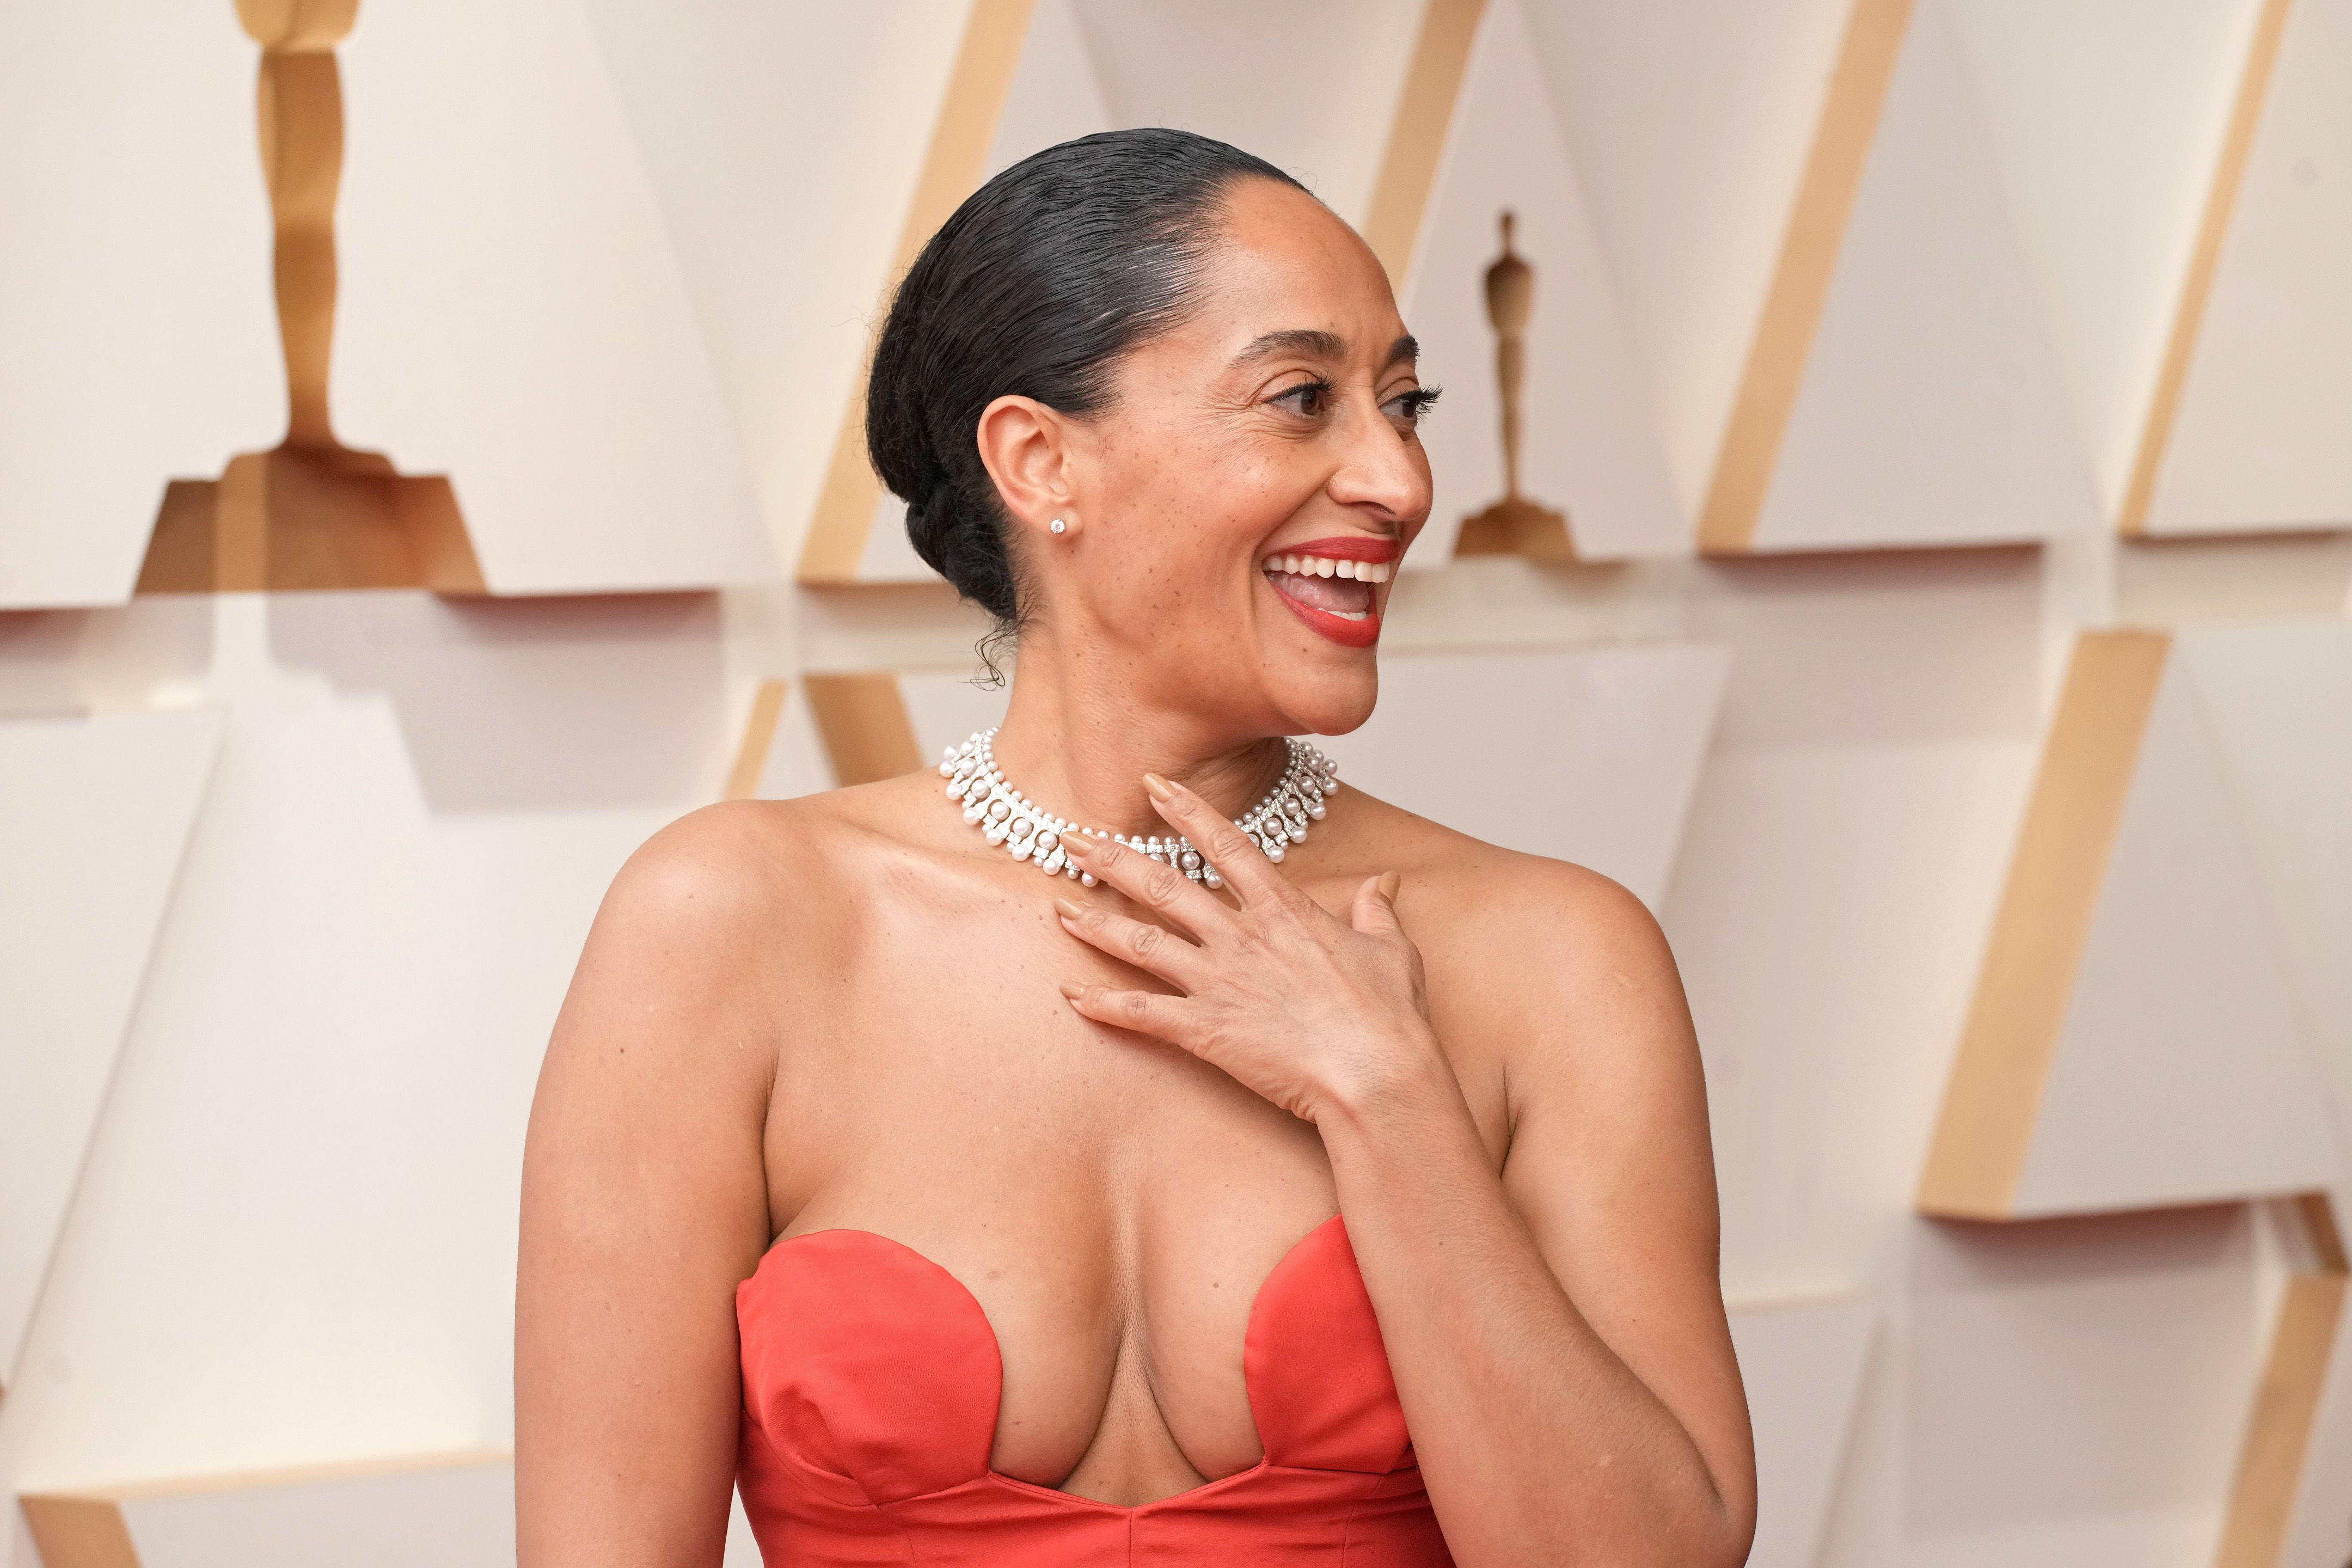 tracee-ellis-ross-attends-the-94th-annual-academy-awards-at-news-photo-1648430590.jpg